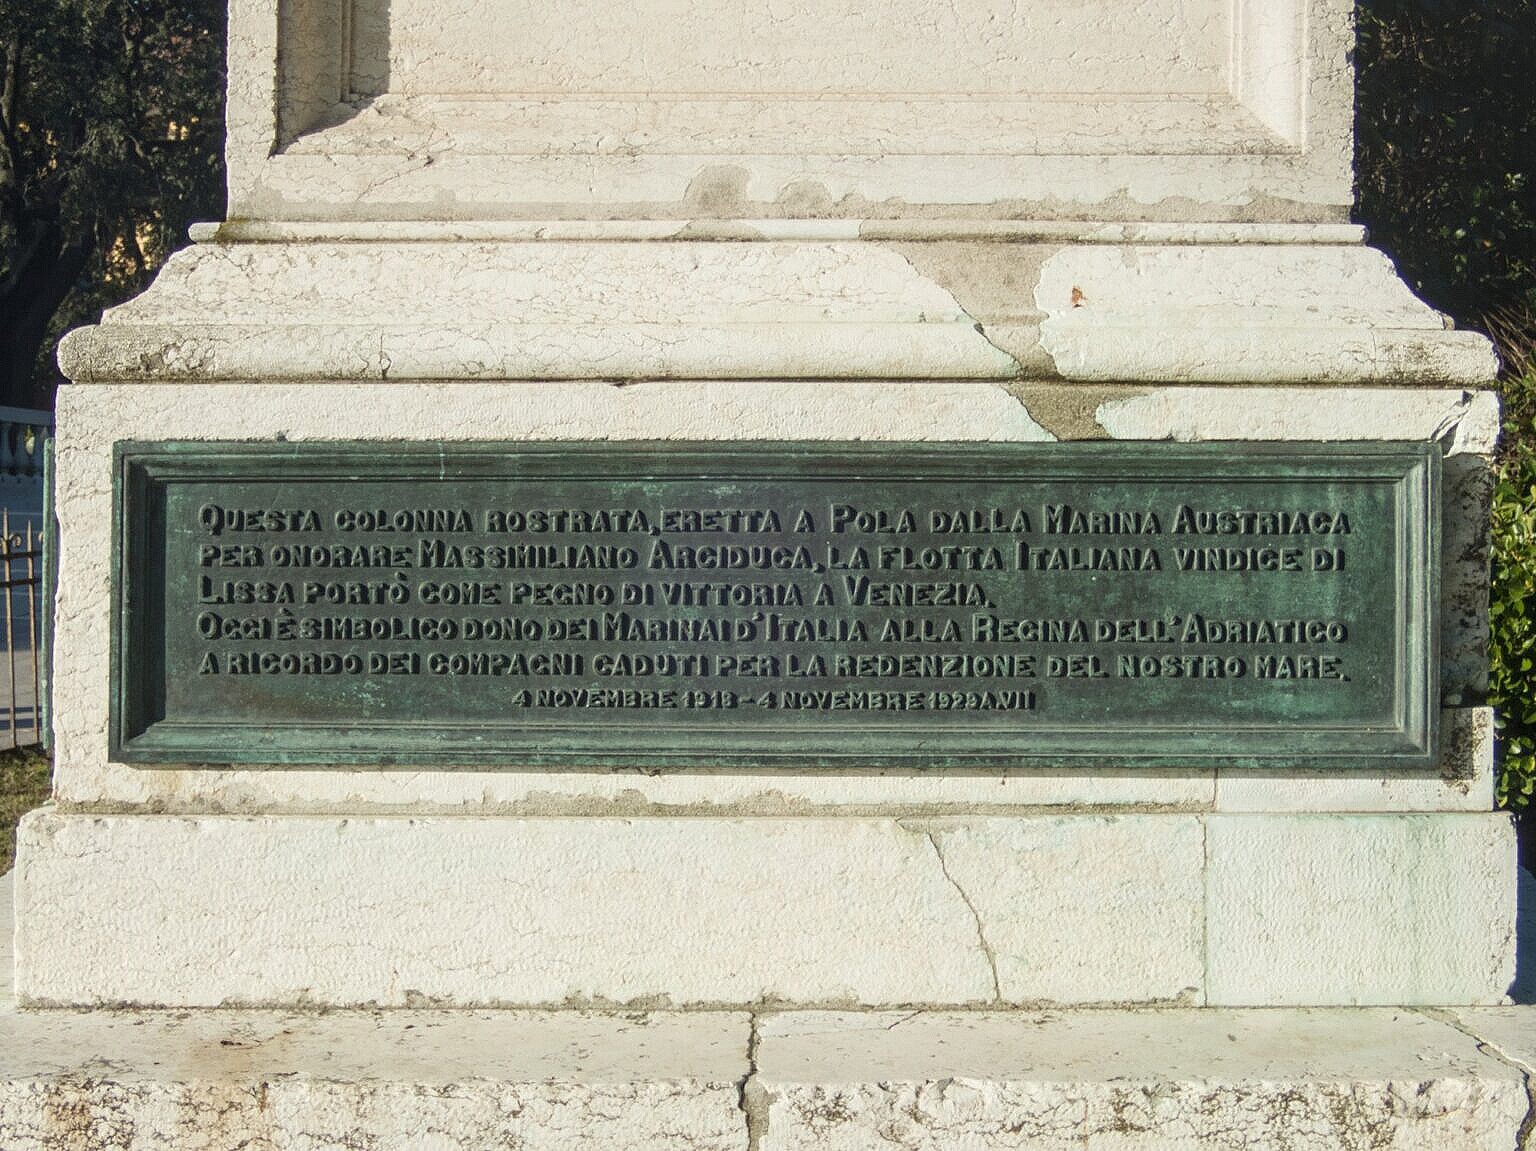 Dedication to Venice on the Monument for the Battle of Lissa (1866)